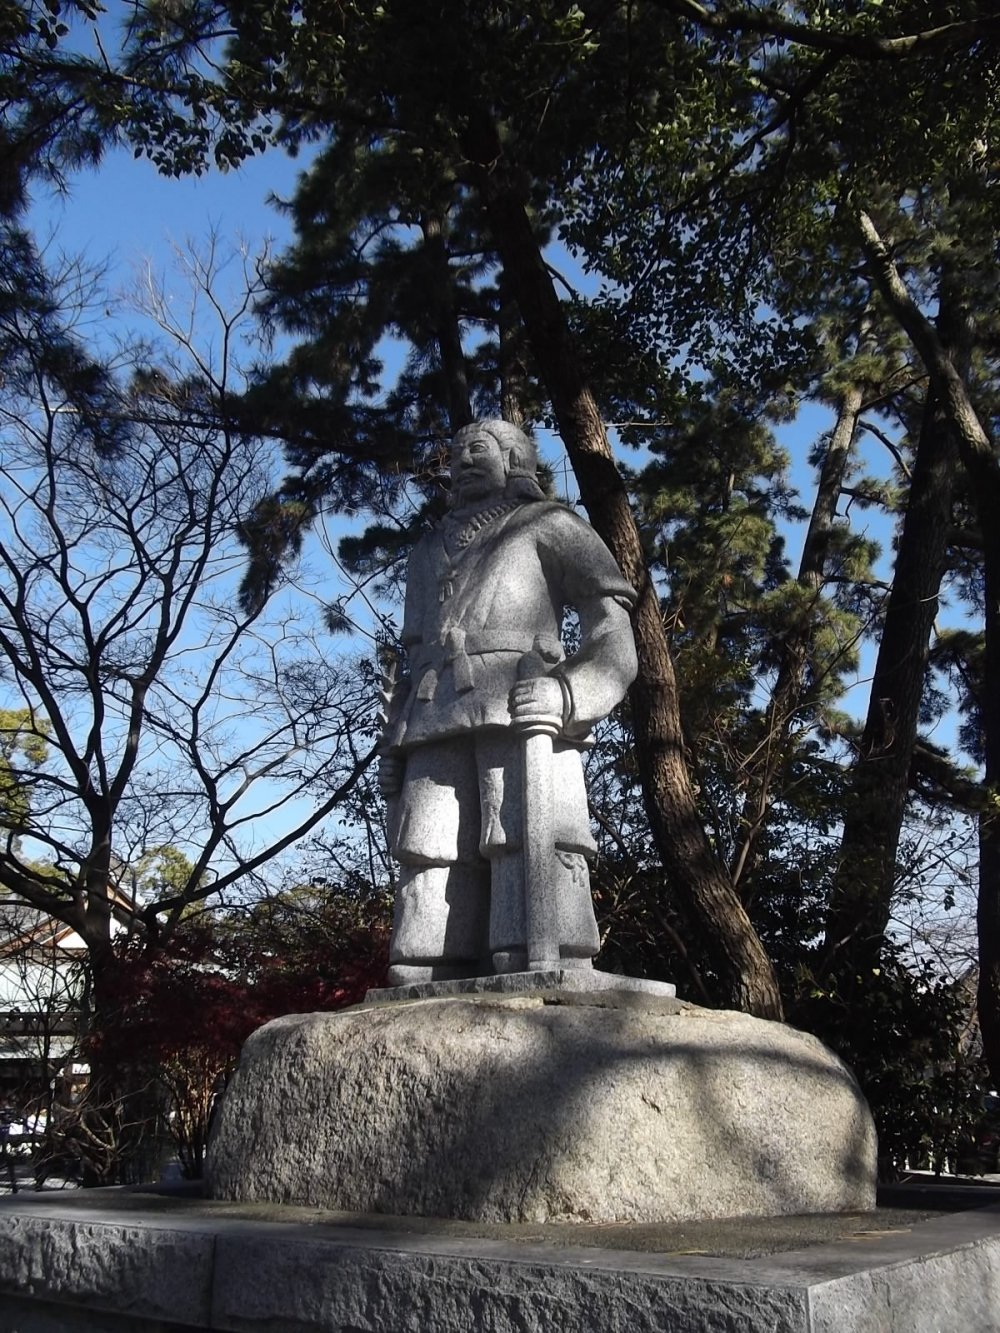 A statue in the grounds